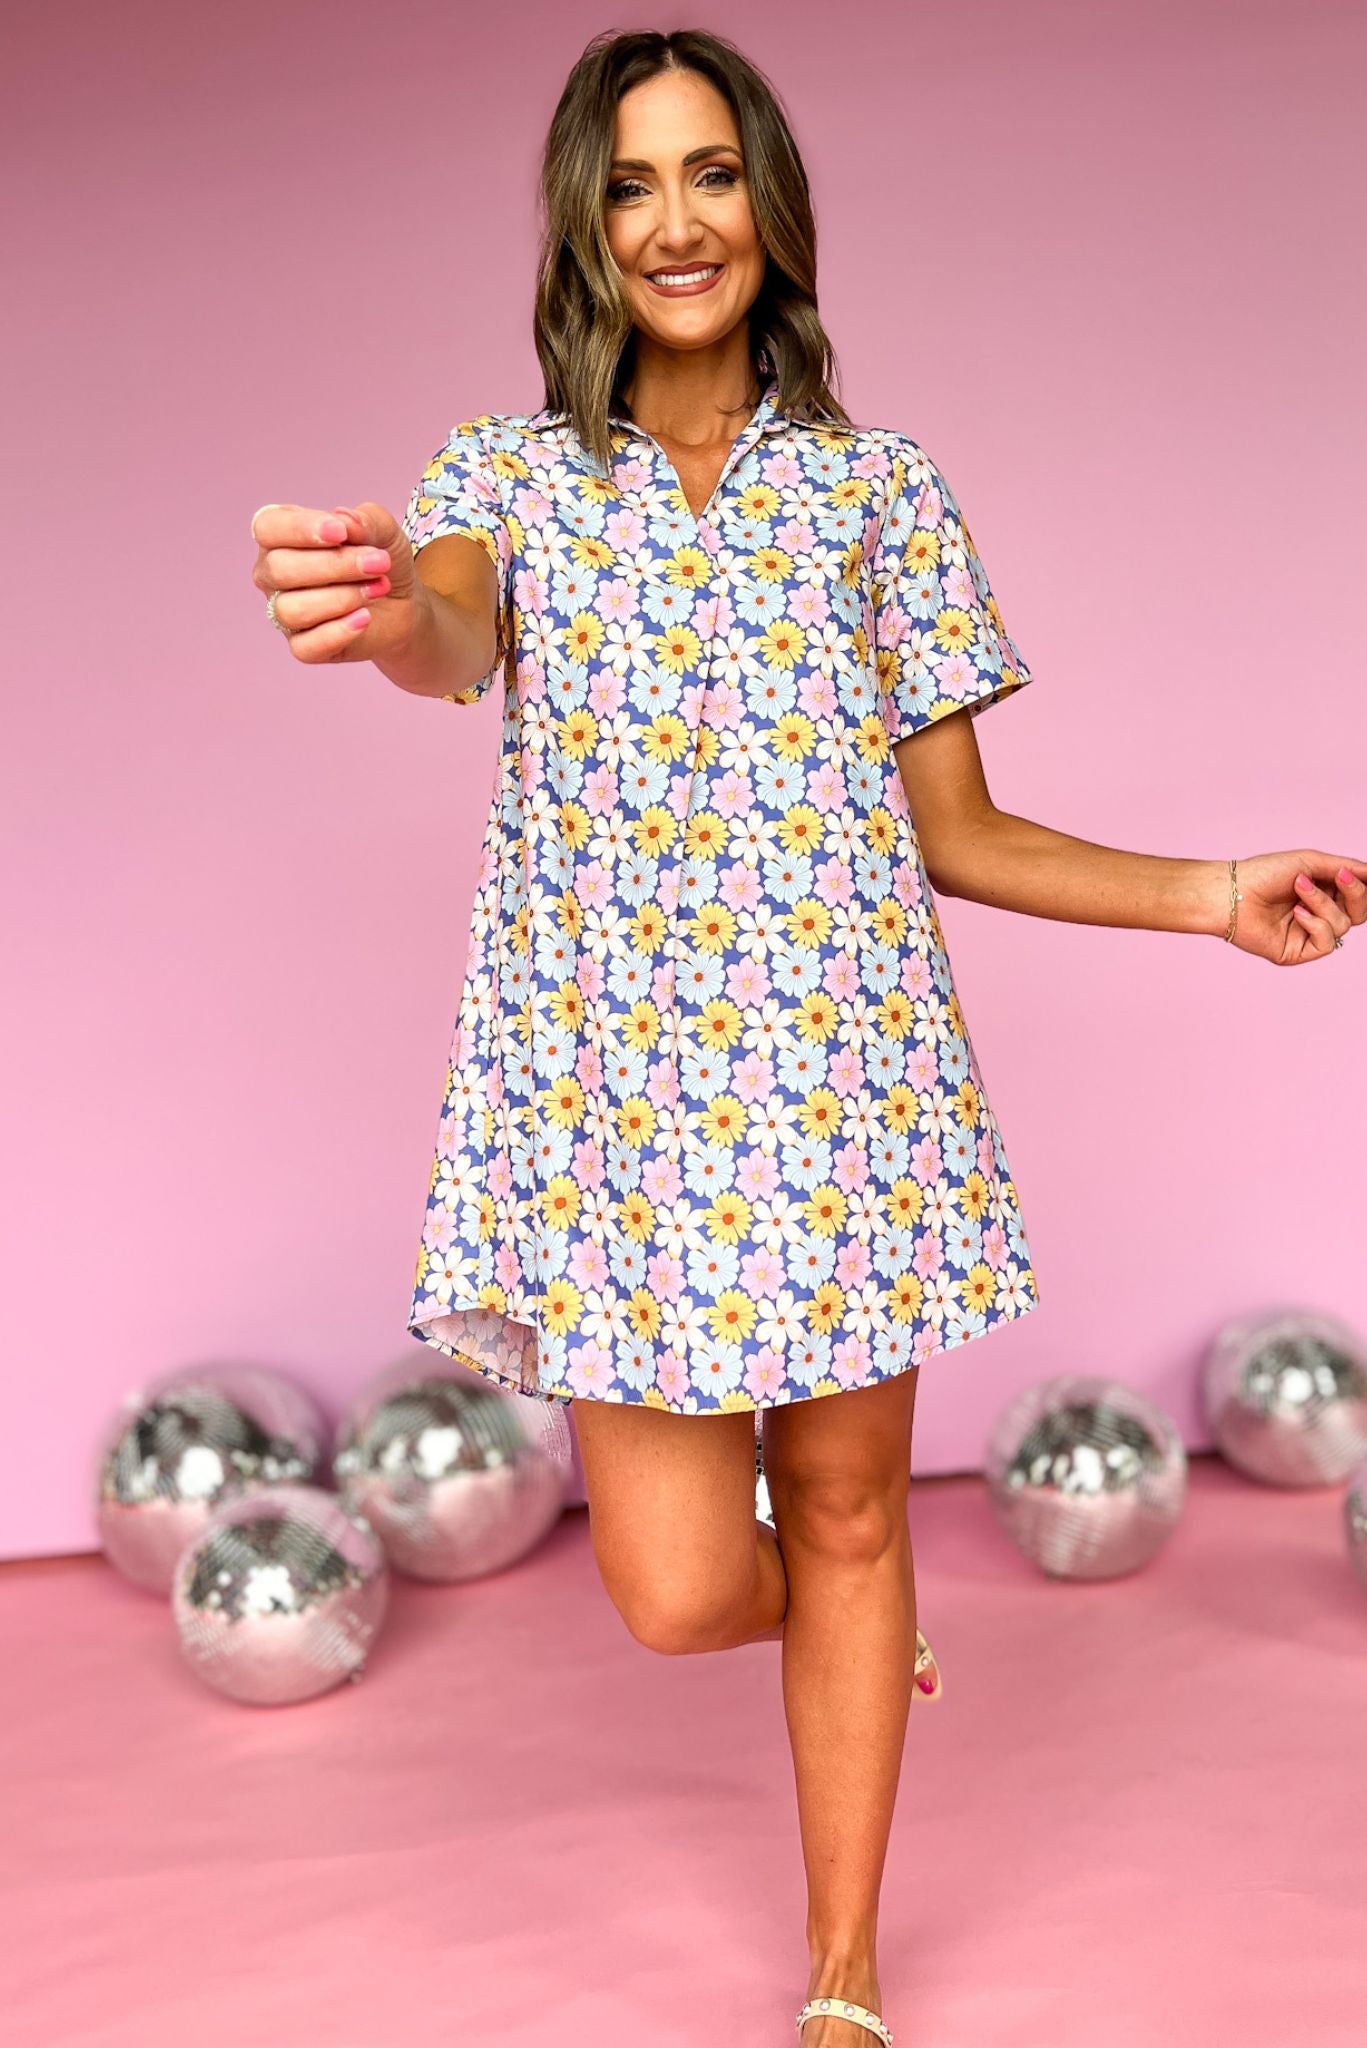 SSYS Blue Floral Print Collared Poplin Dress, collar detail poplin, v neck, everyday wear, mom style, shop style your senses by mallory fitzsimmons